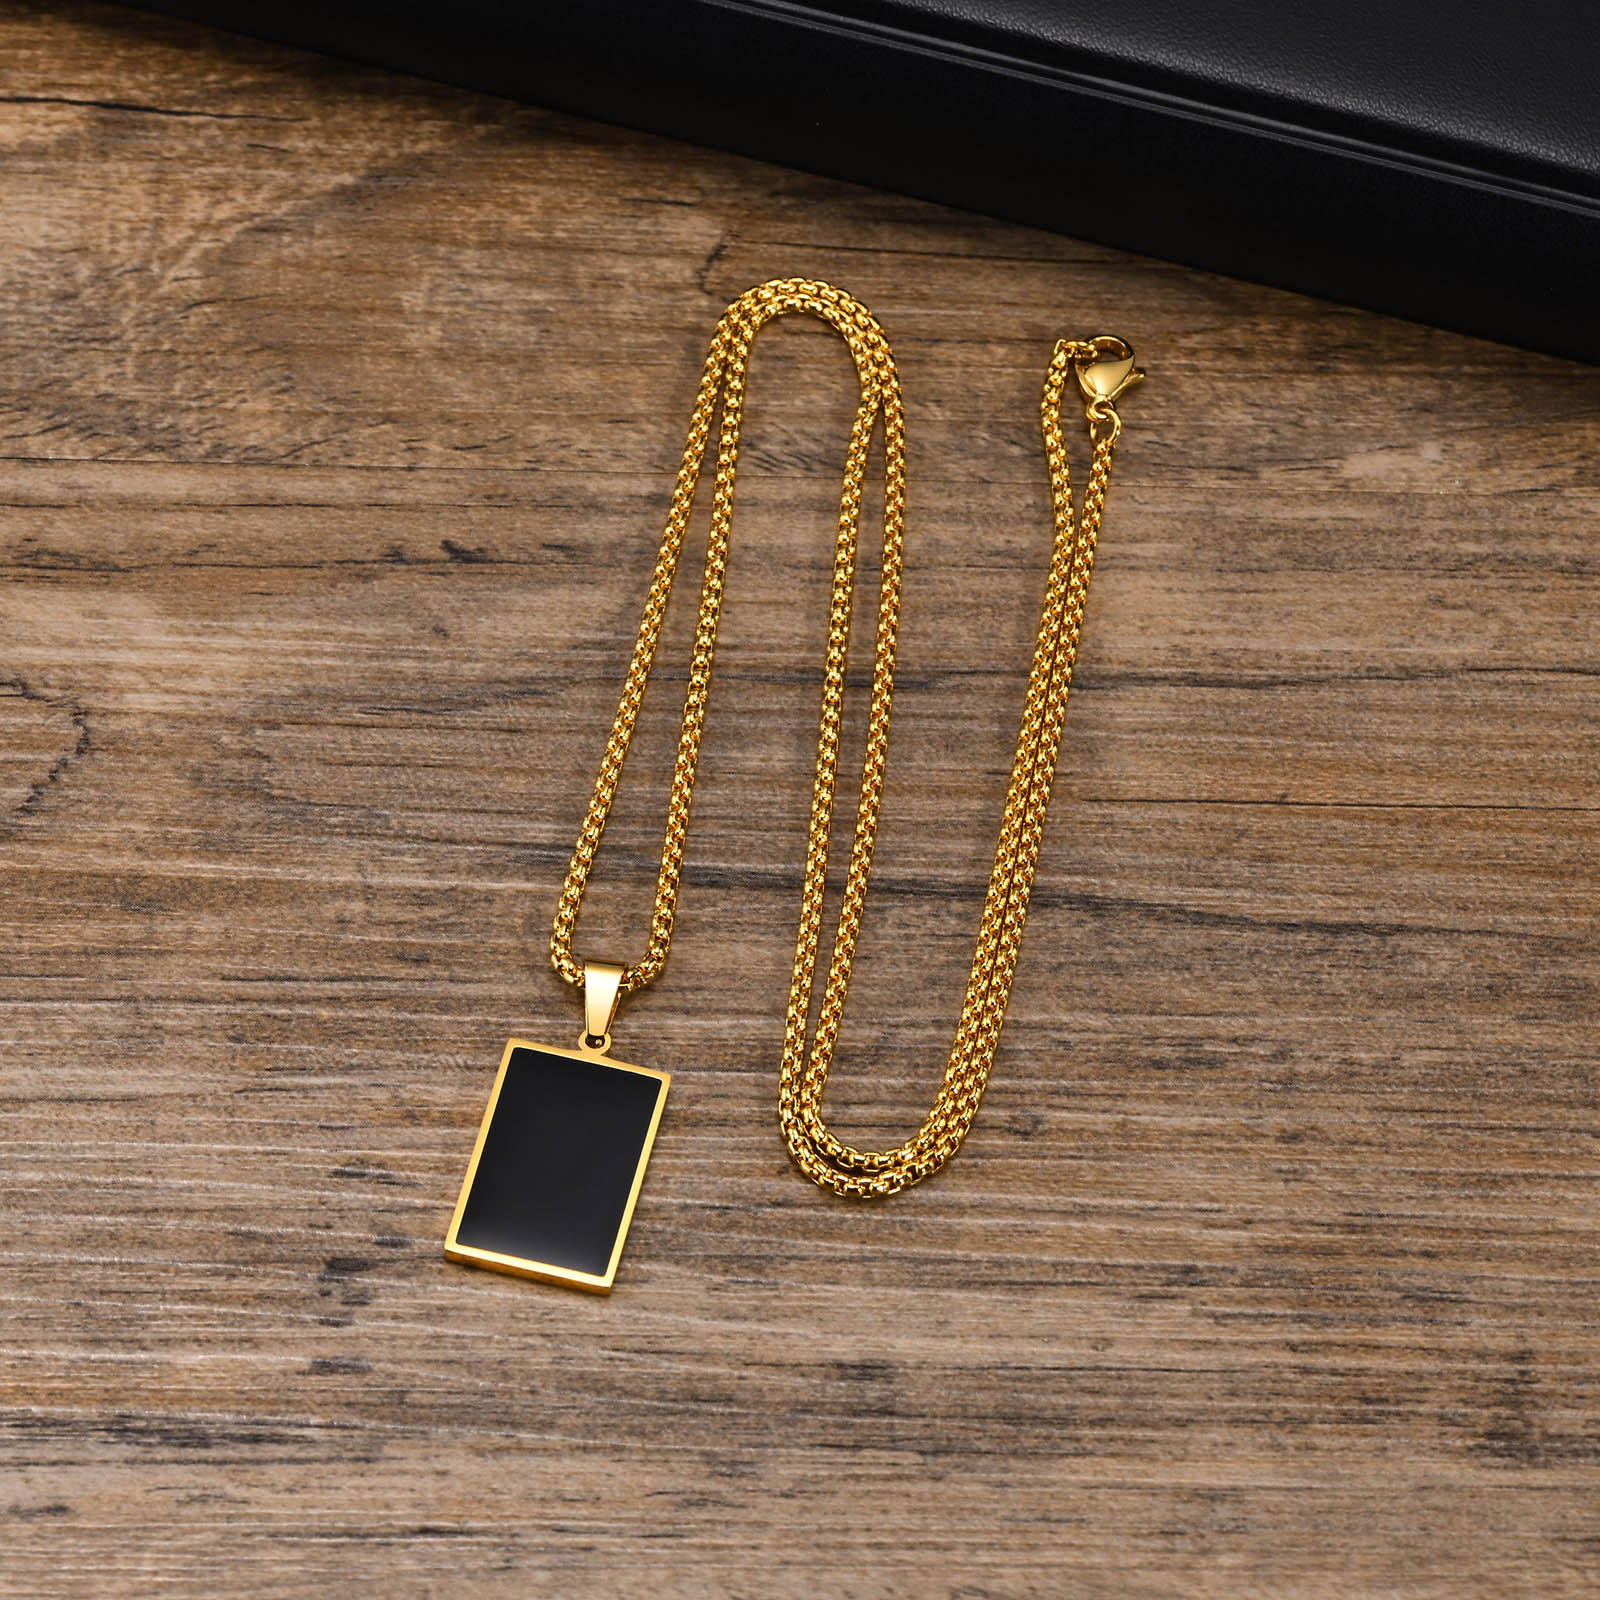 4:Gold pendant 60CM with chain